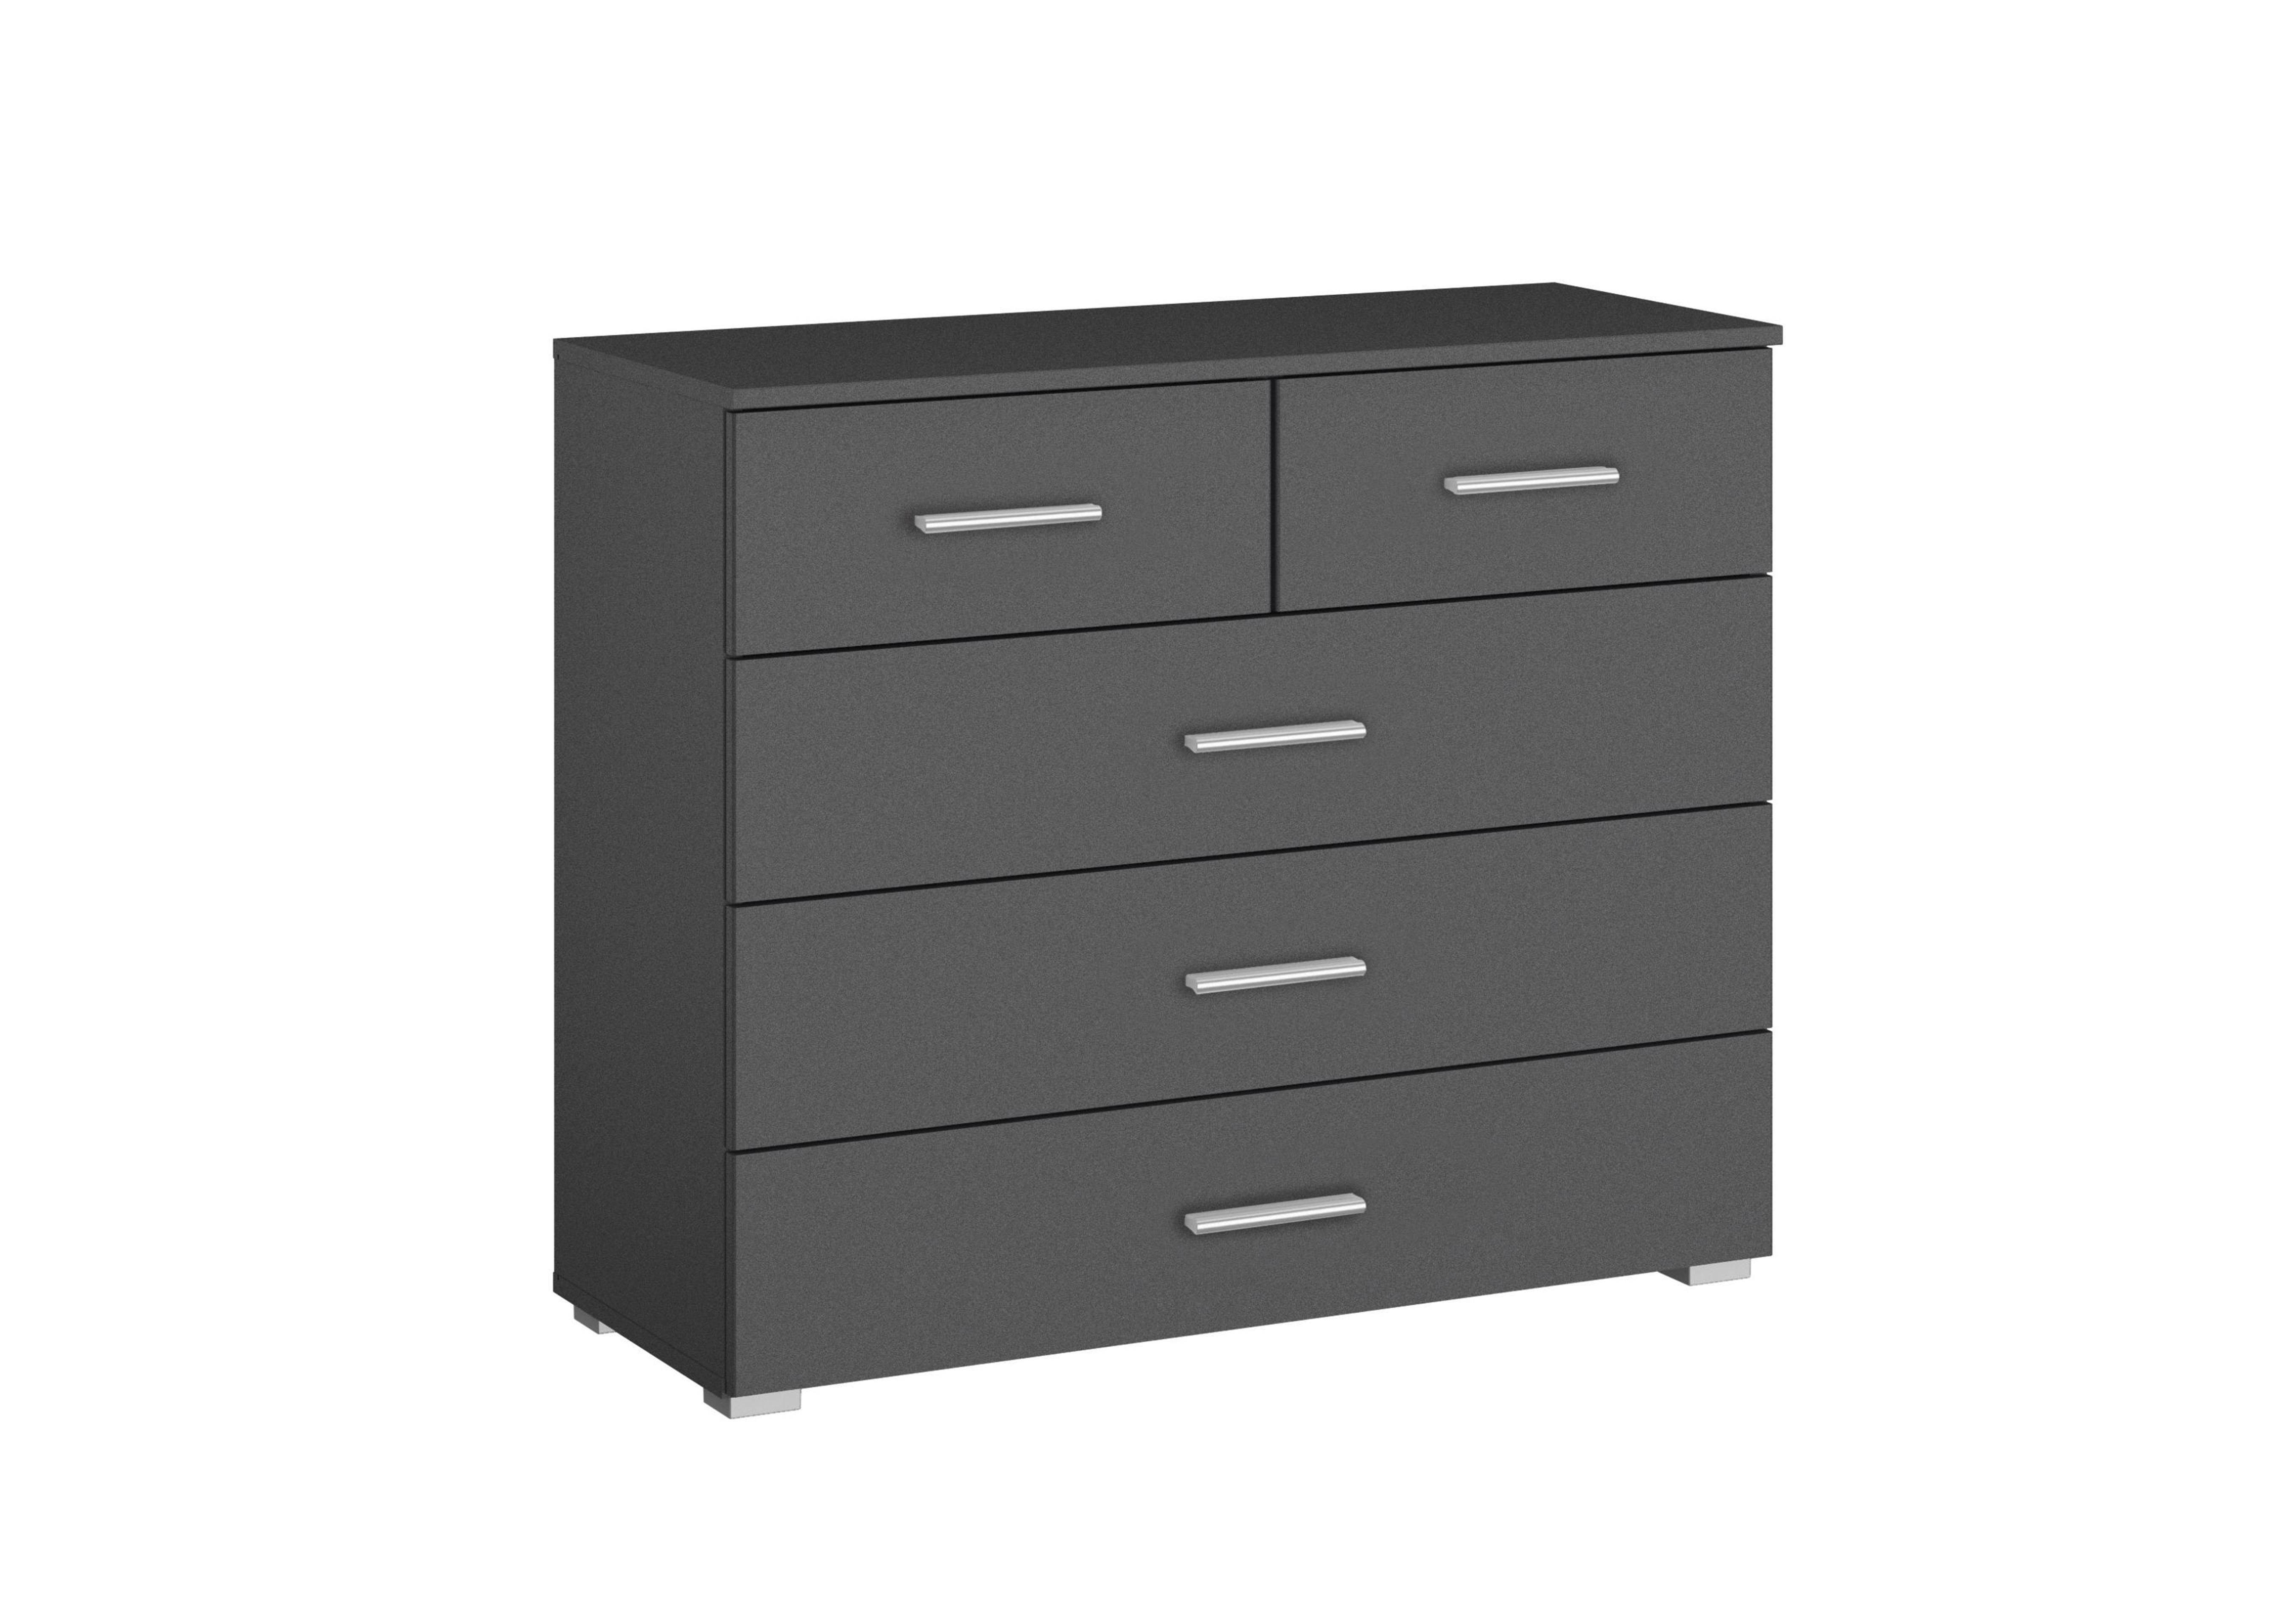 Solo 3+2 Chest of Drawers in Ap849 Metallic Grey on Furniture Village